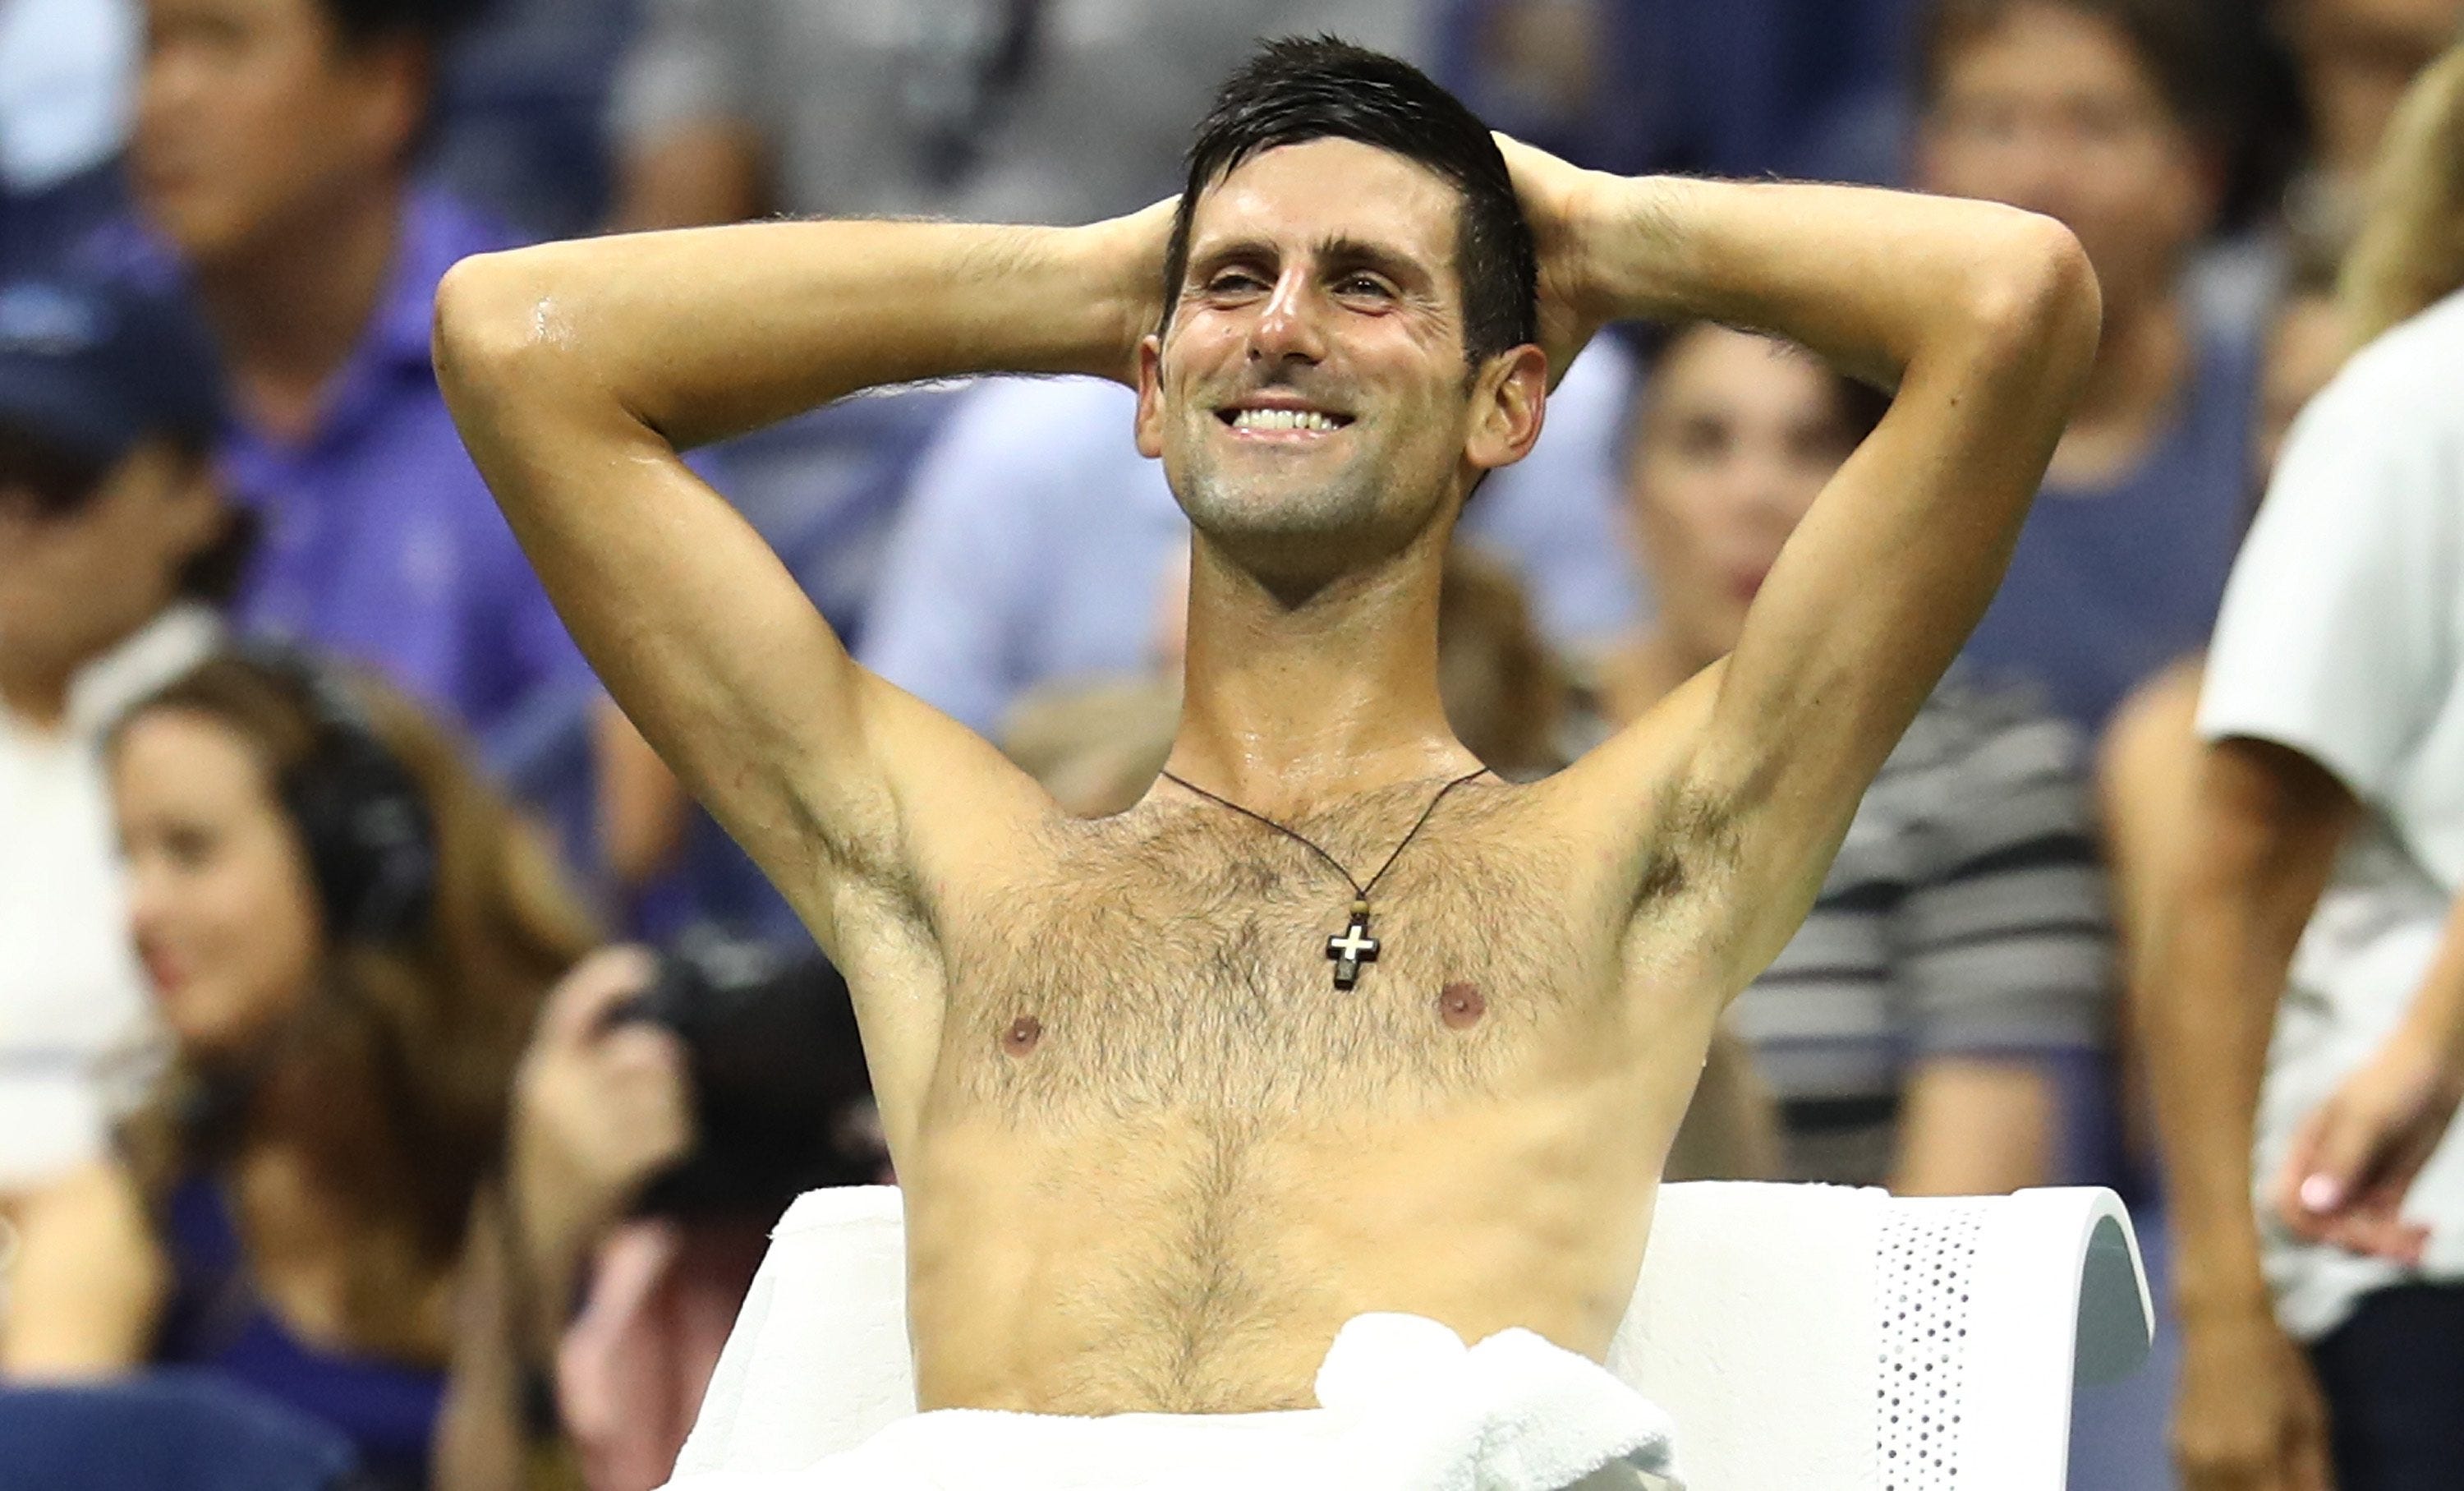 Novak Djokovic gifted the internet with a delightful new GIF at U.S. Open.